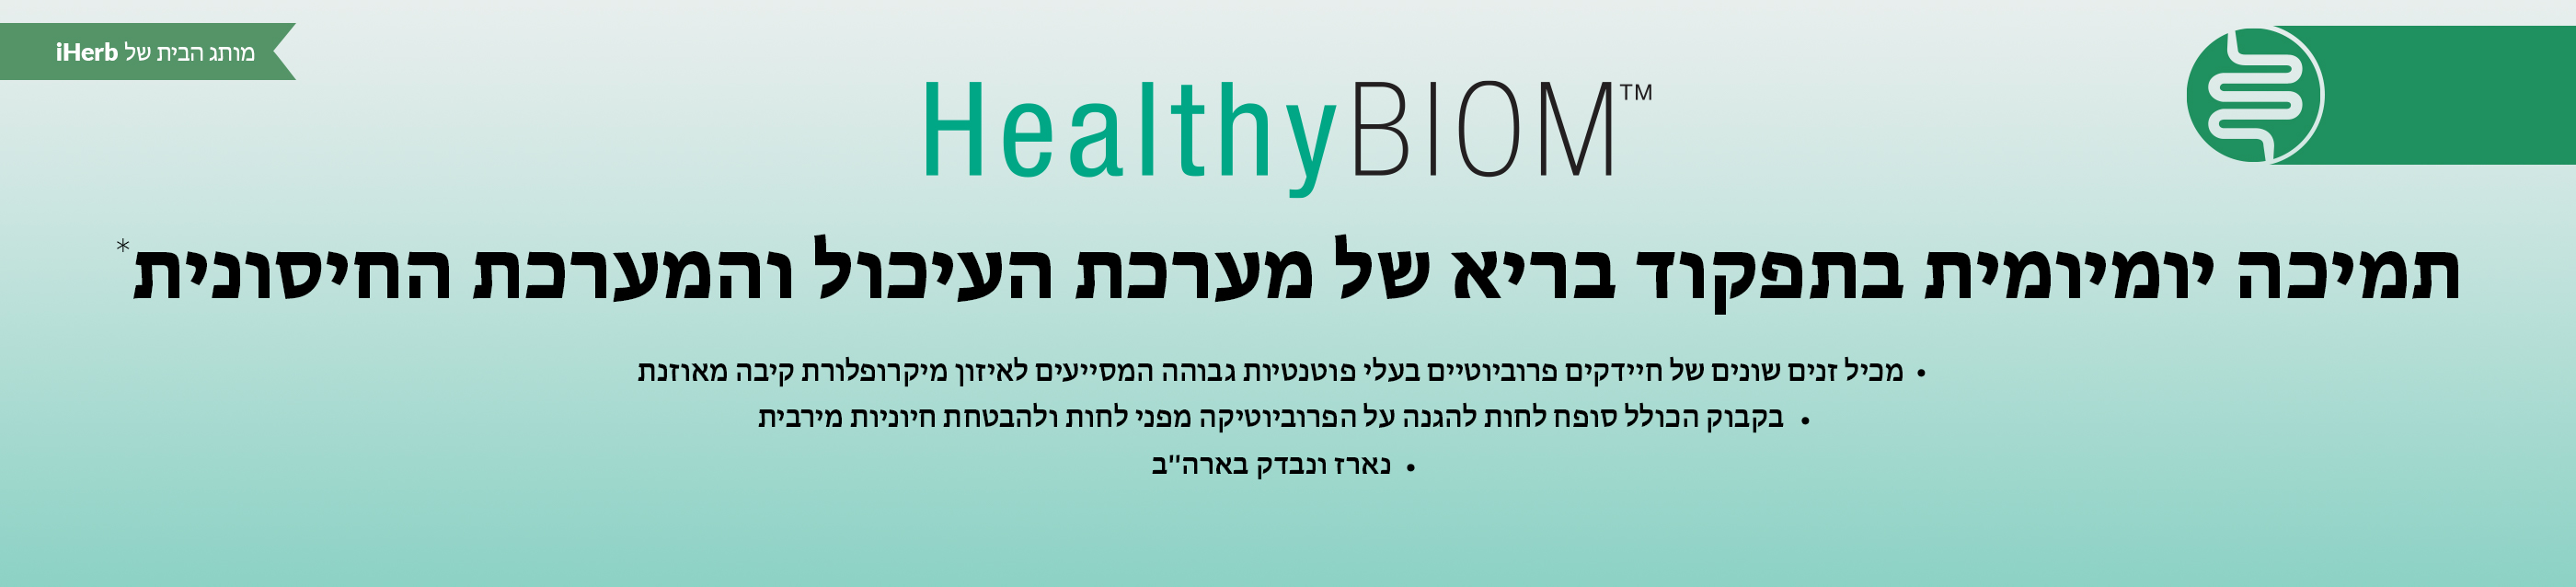 HealthyBiom